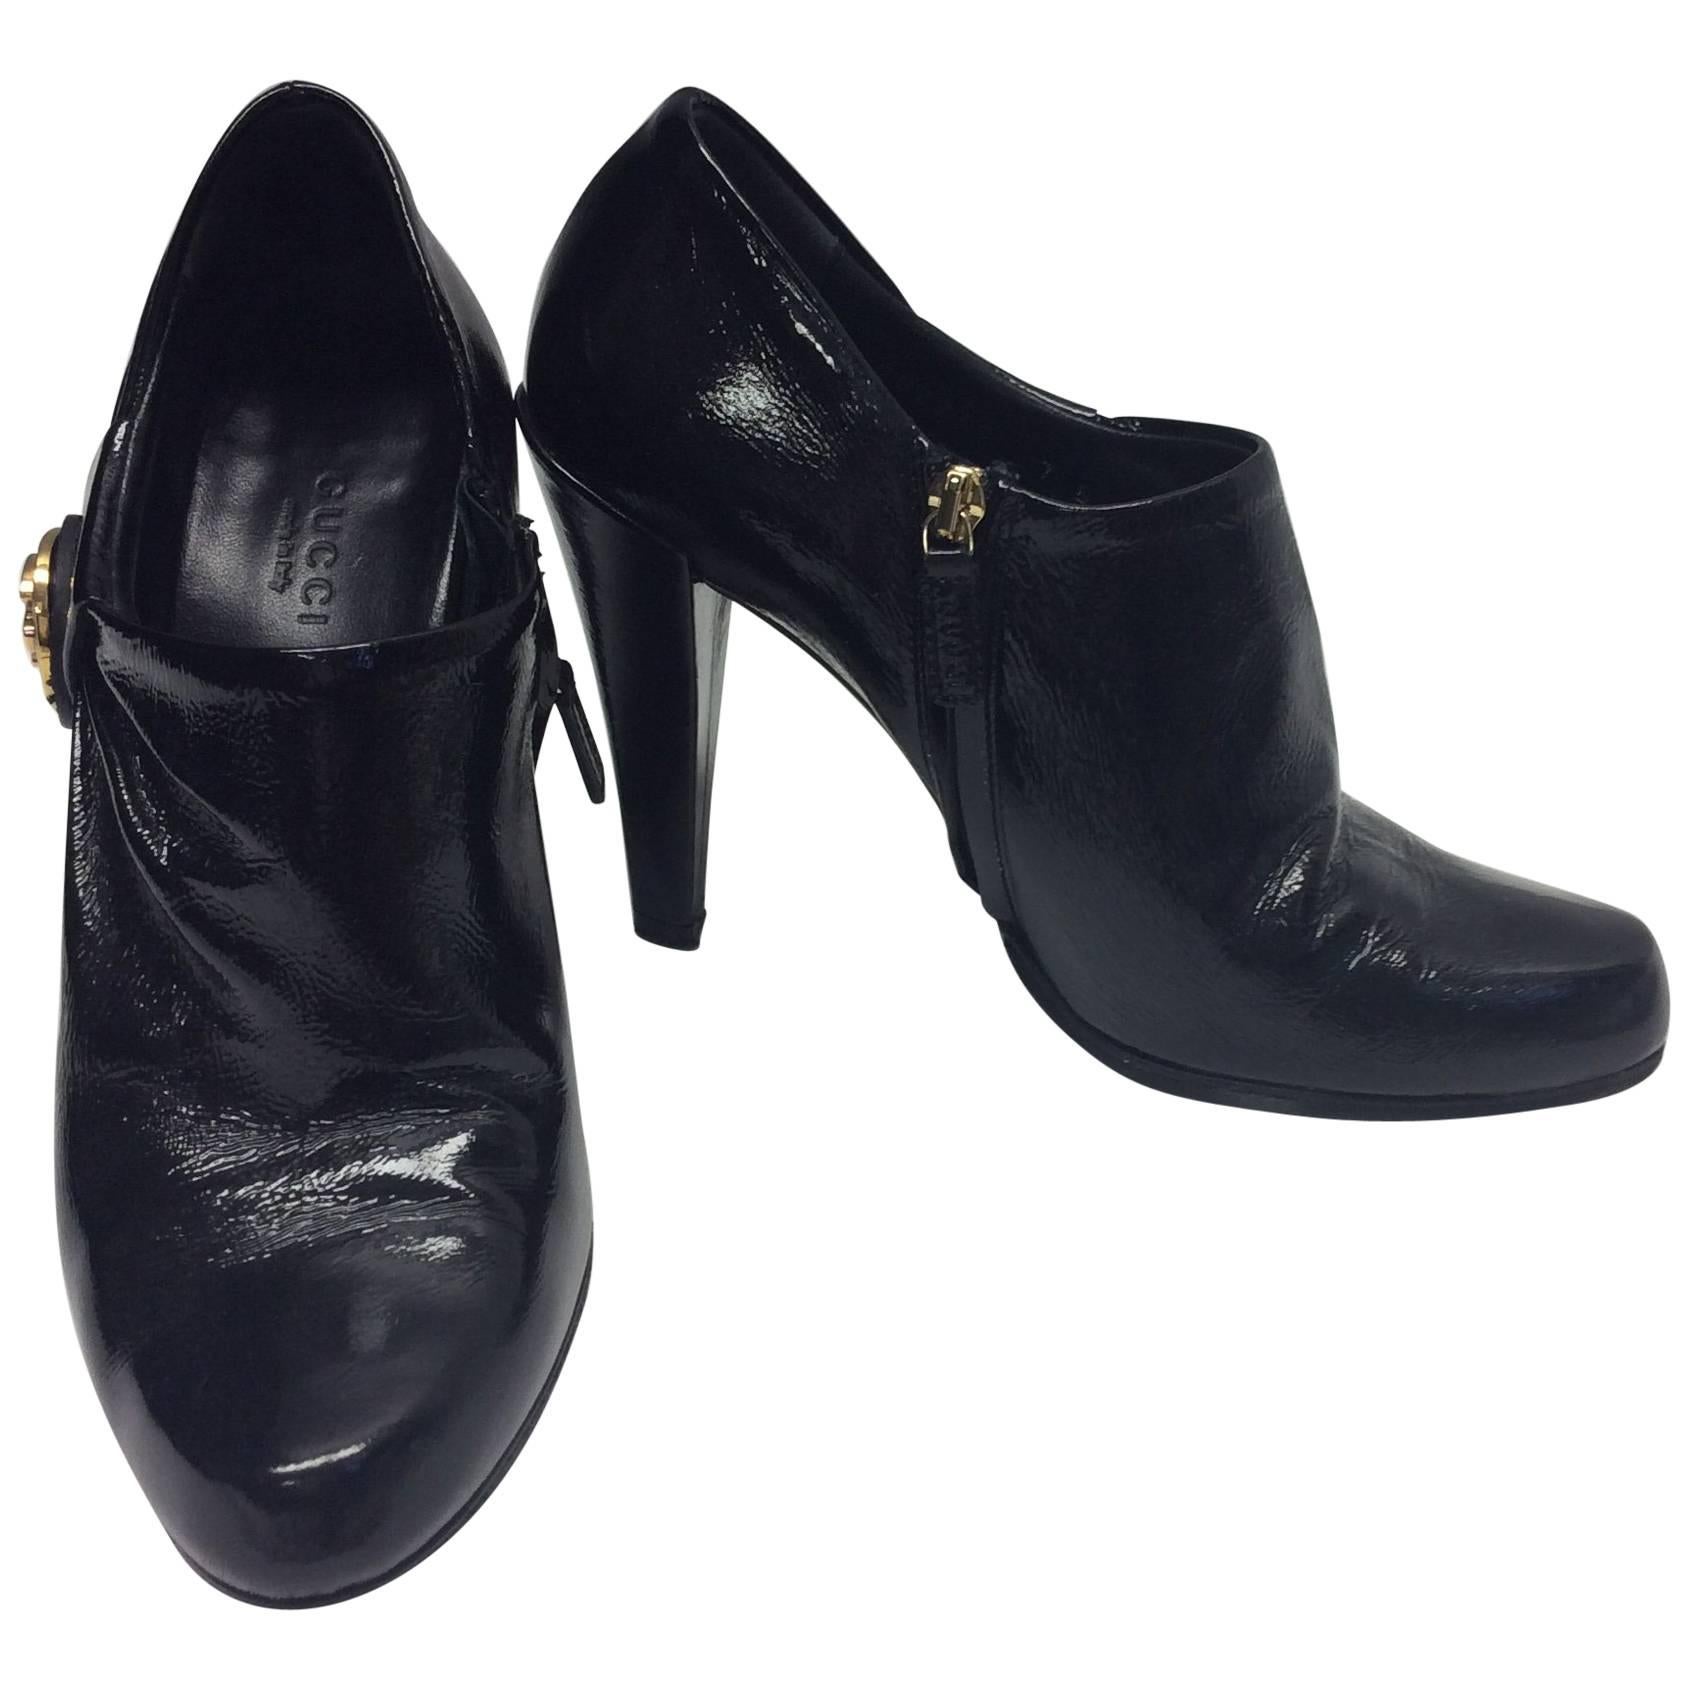 Gucci Patent Leather Short Ankle Booties
Size 7 
Made in Italy
4 inch heel
$299